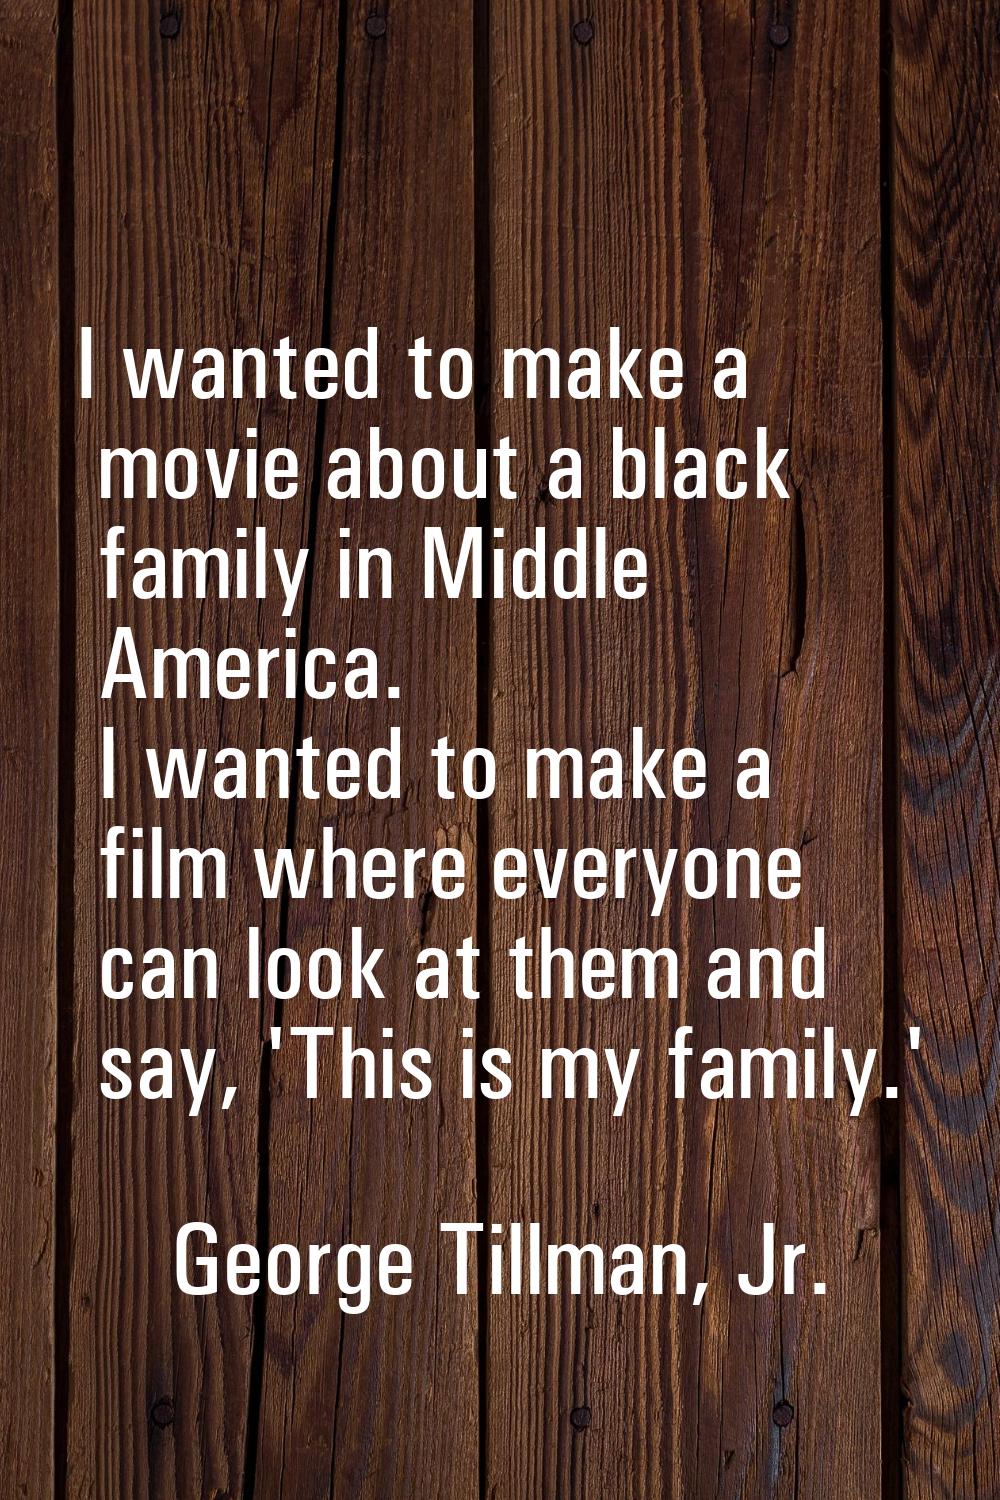 I wanted to make a movie about a black family in Middle America. I wanted to make a film where ever